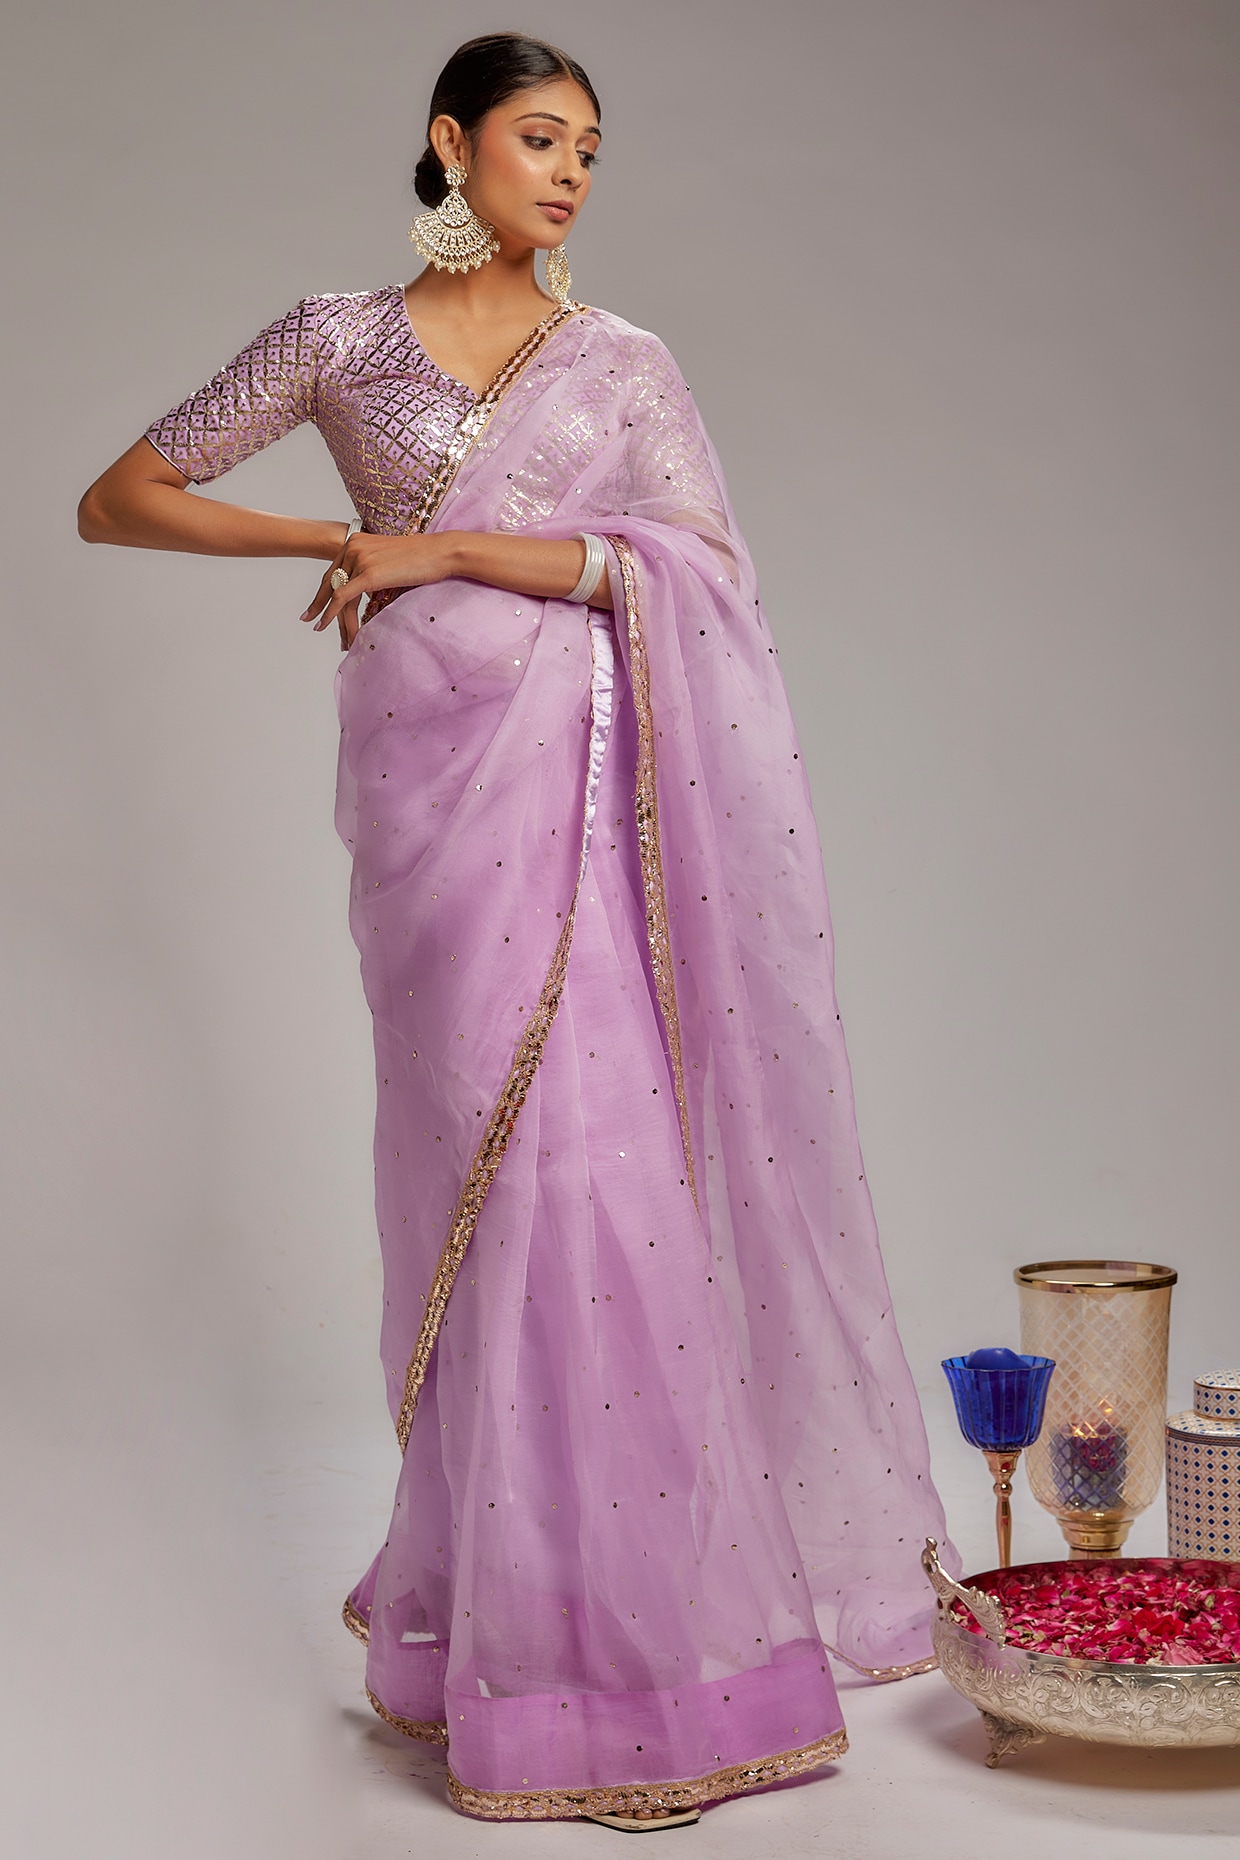 Buy Space Blue Saree In Chiffon With Badla Work All Over Online - Kalki  Fashion